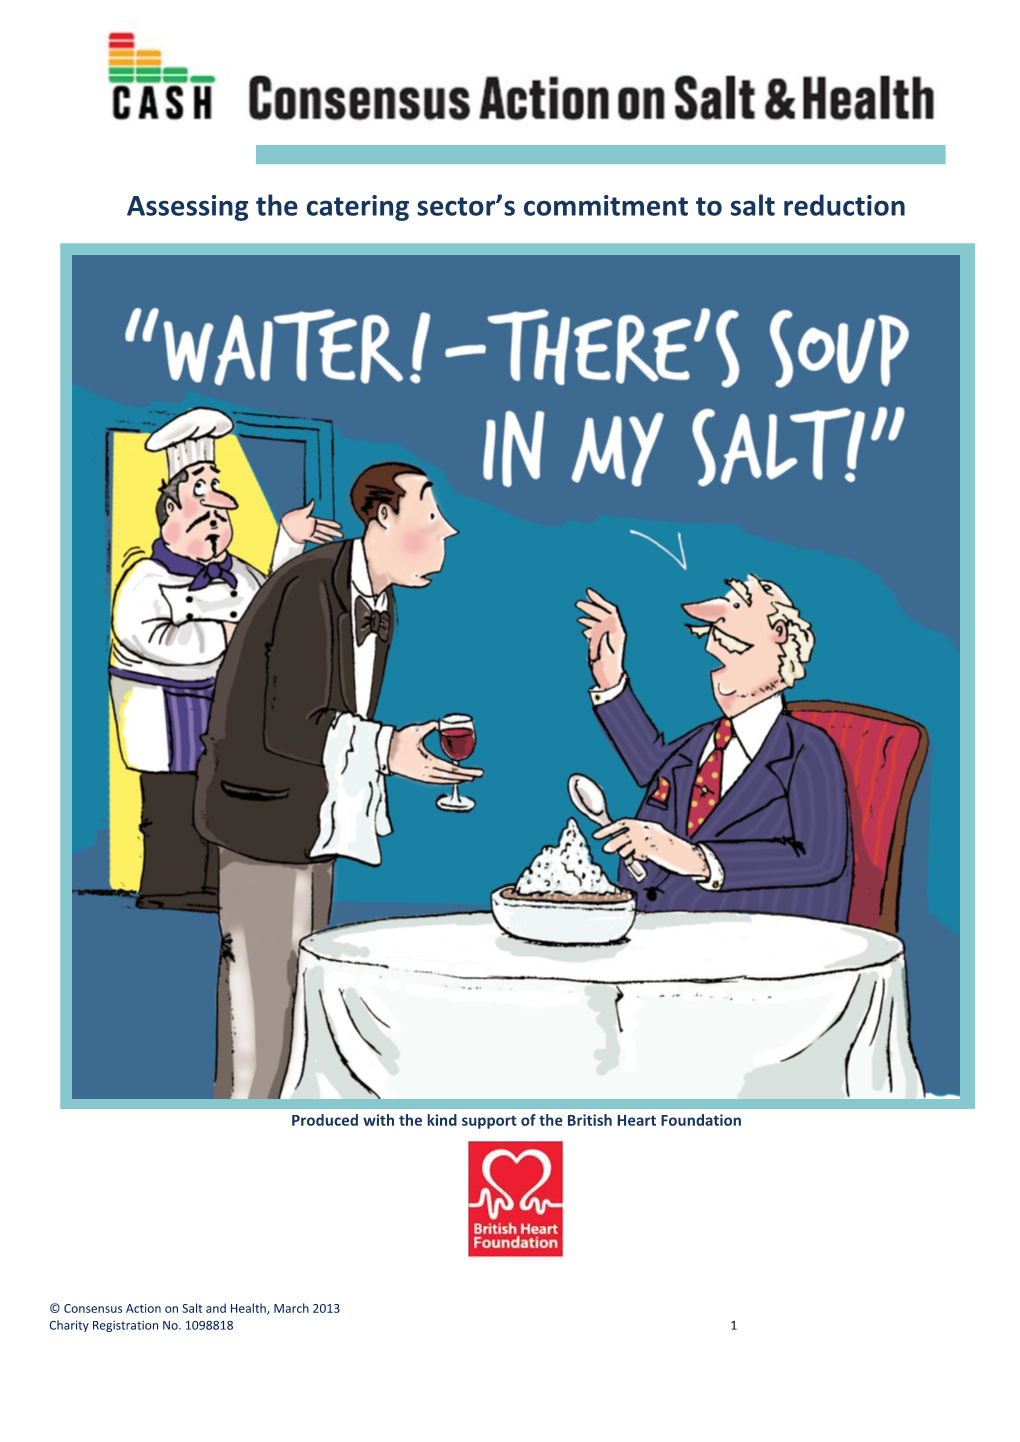 Assessing the Catering Sector's Commitment to Salt Reduction